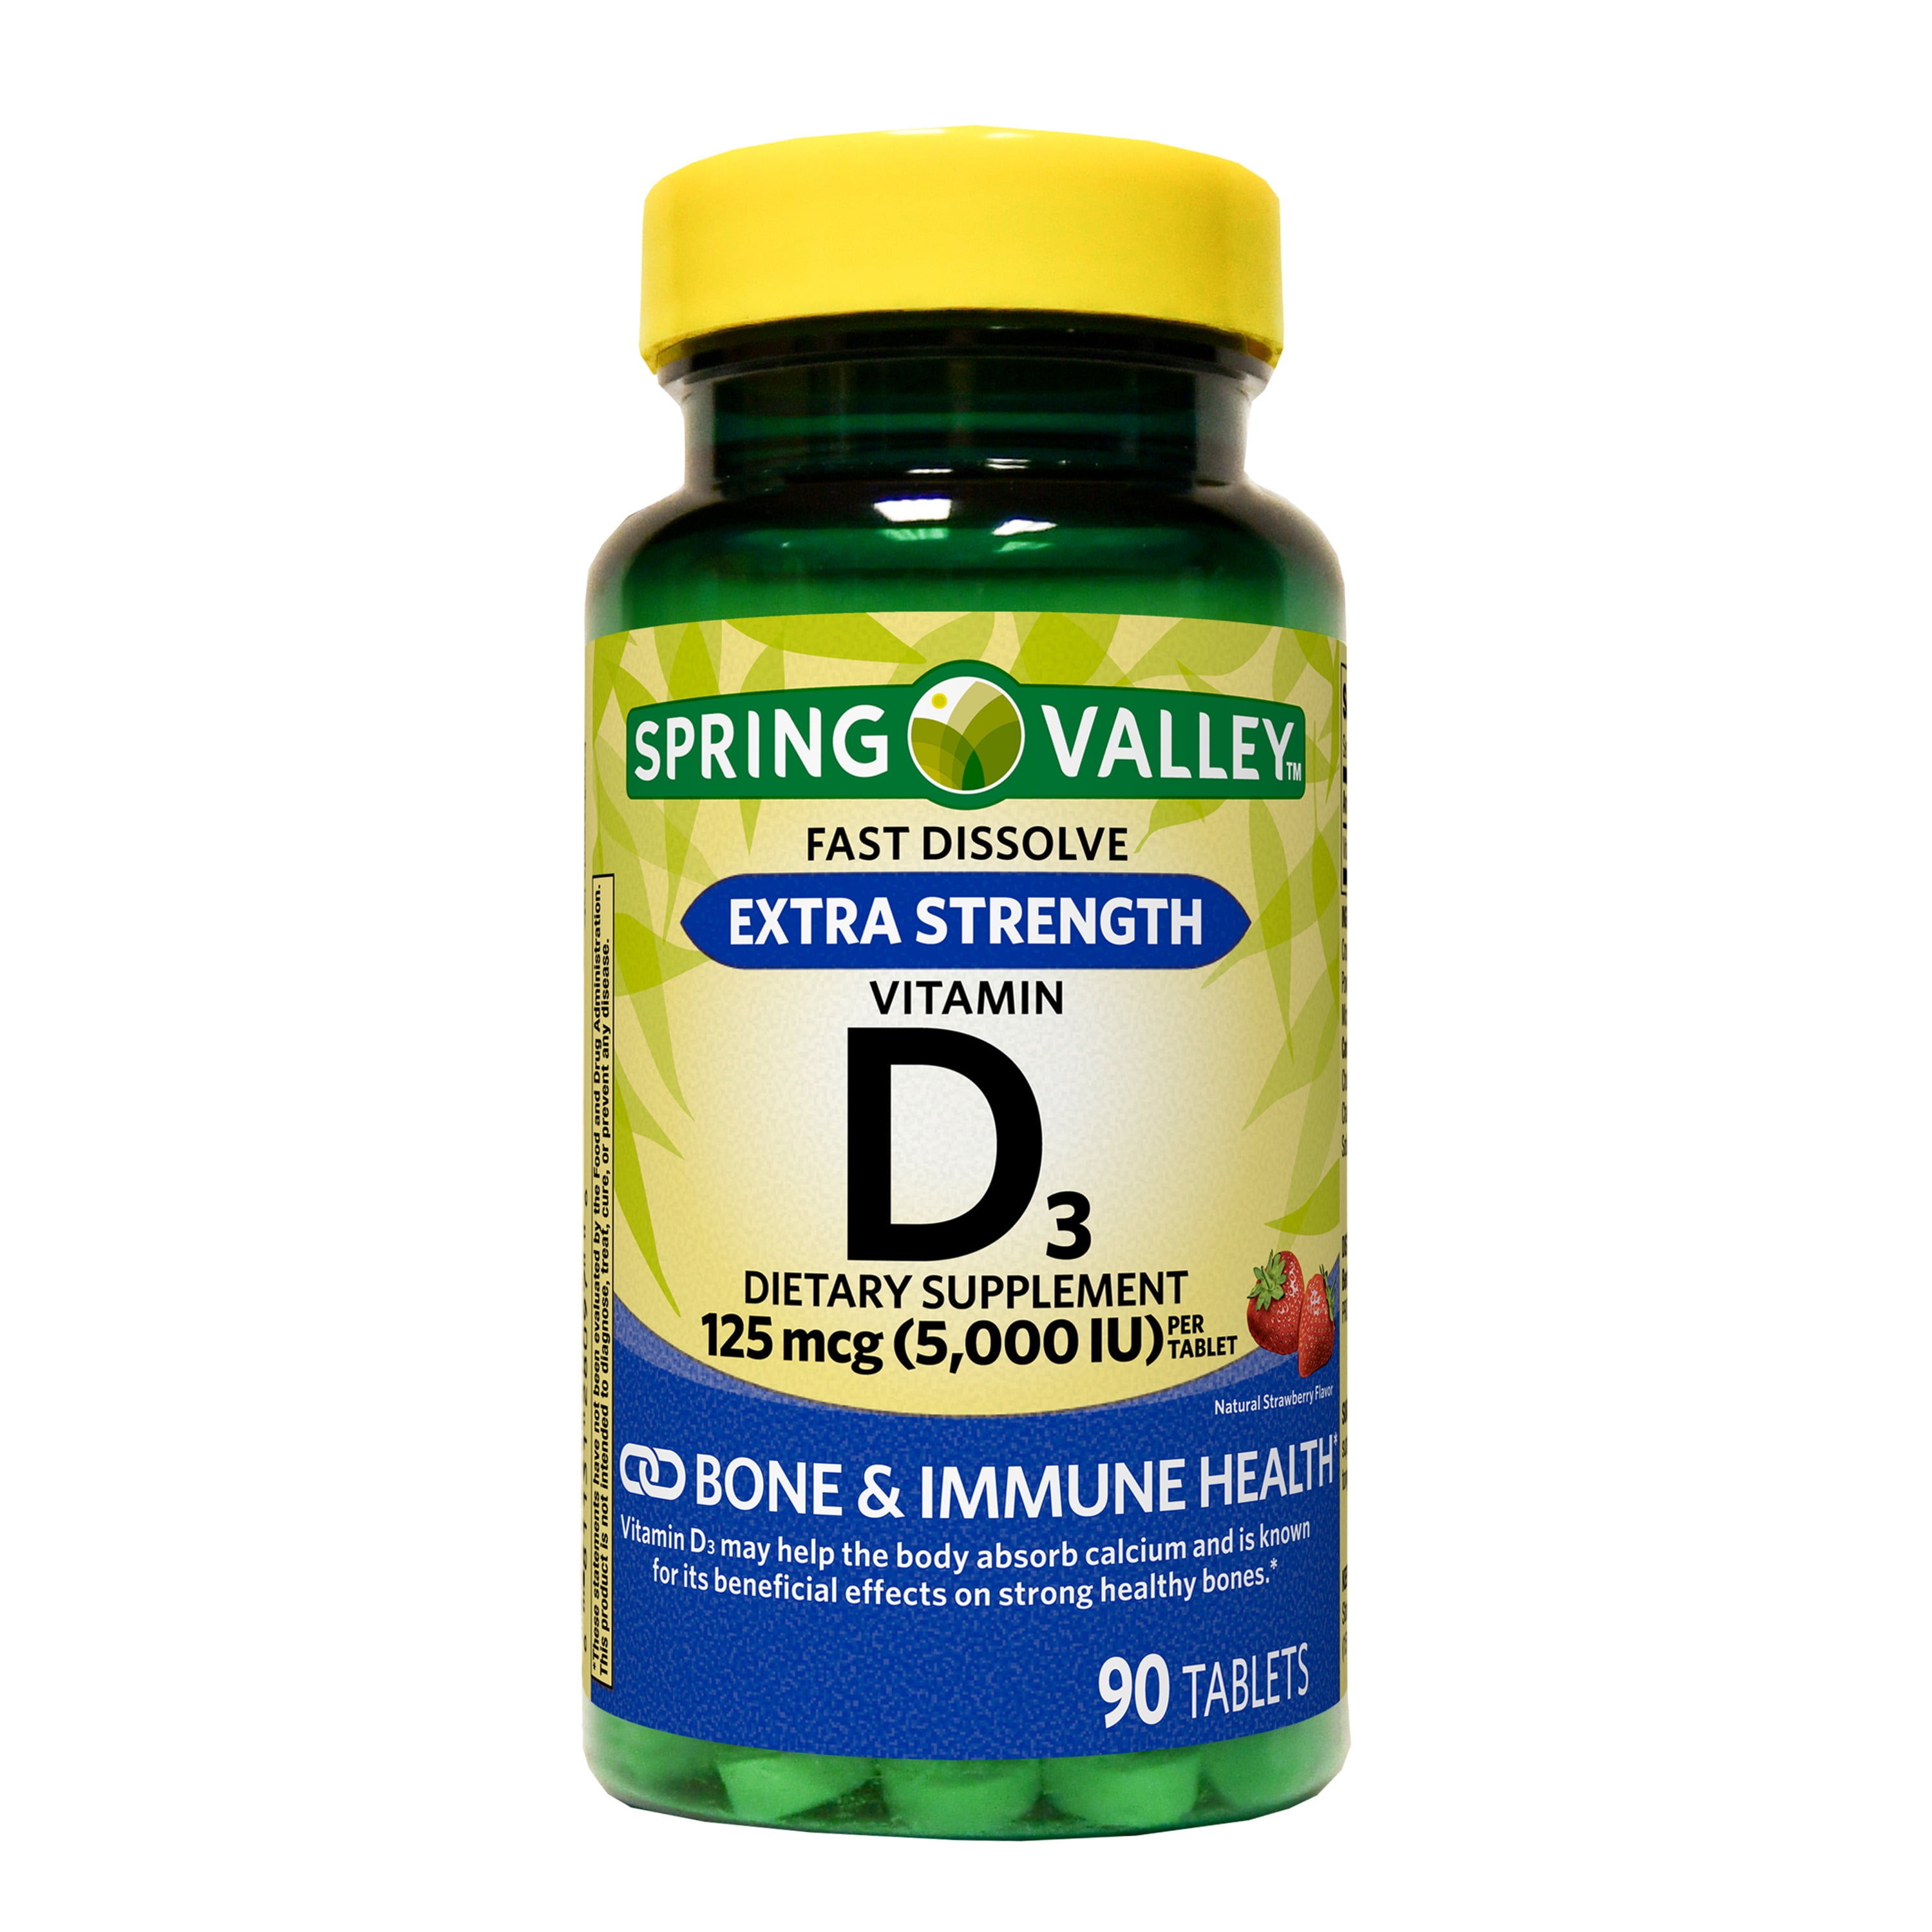 Spring Valley Extra Strength Vitamin D3 Fast Dissolve Tablets Dietary Supplement, 125 mcg (5,000 IU), Strawberry Flavor, 90 Count